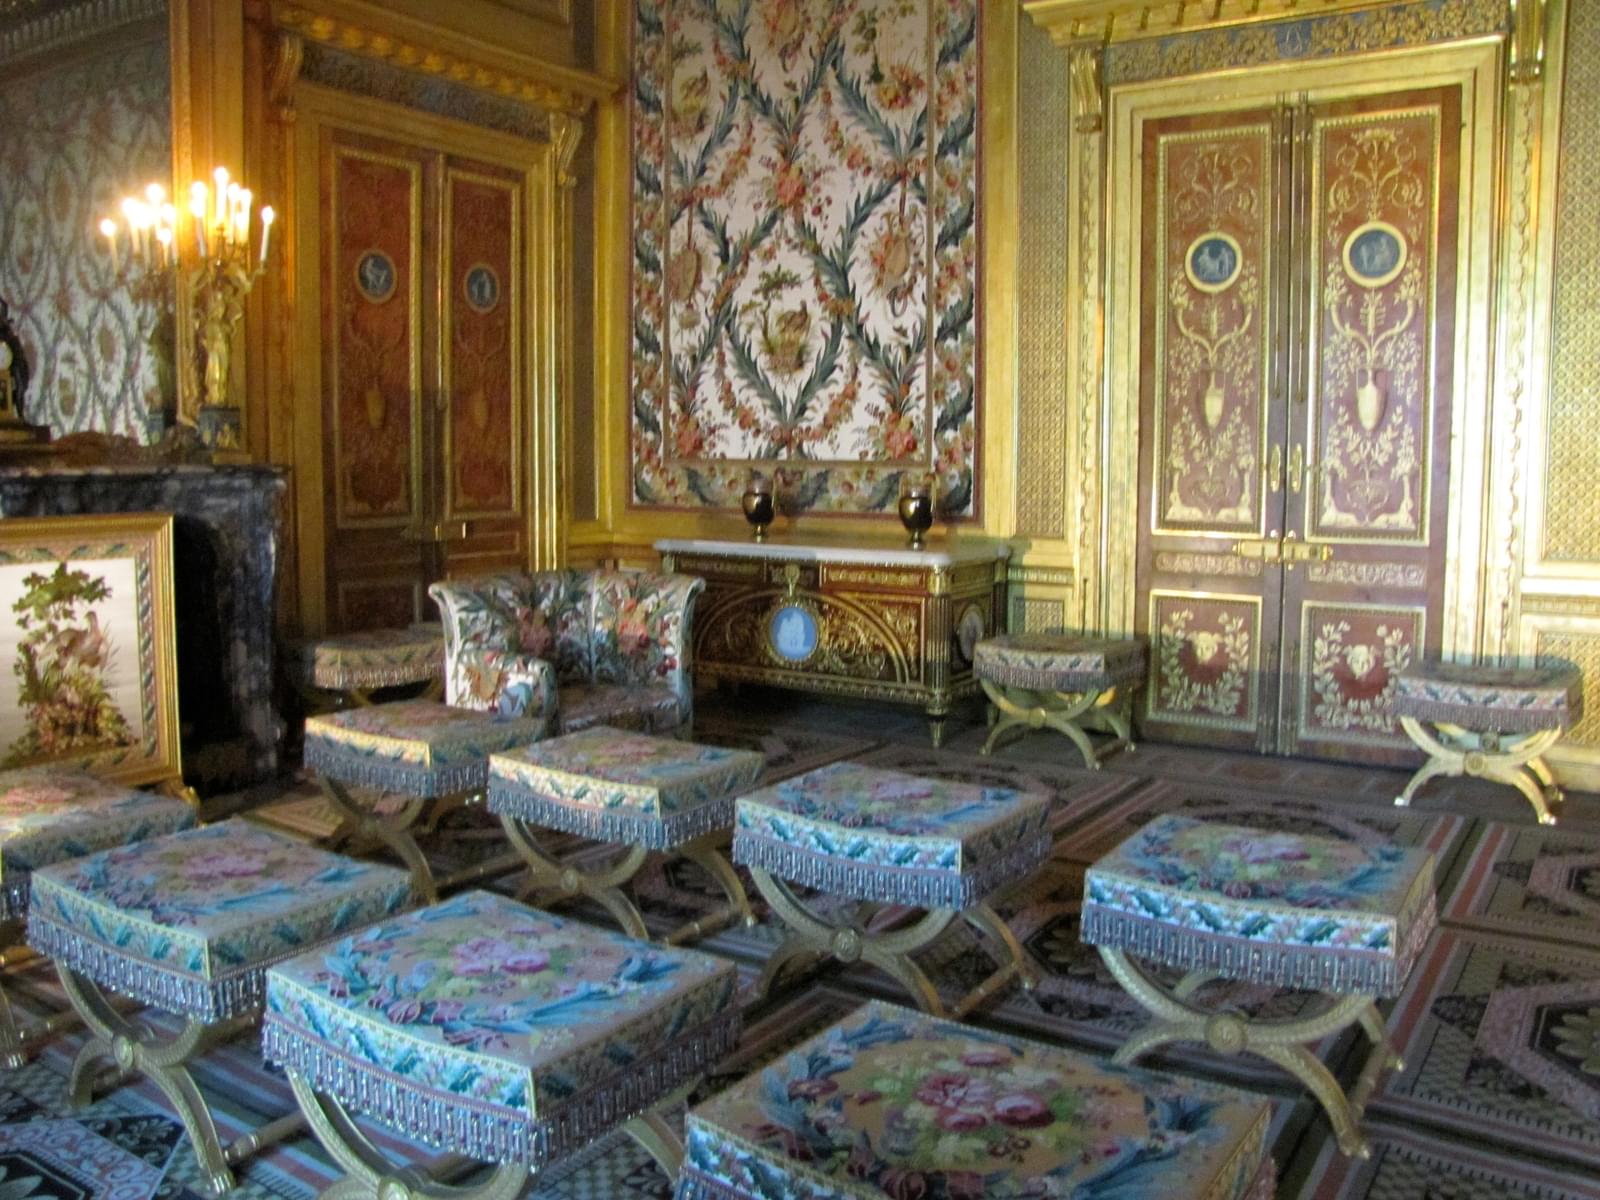 Private rooms of Medici